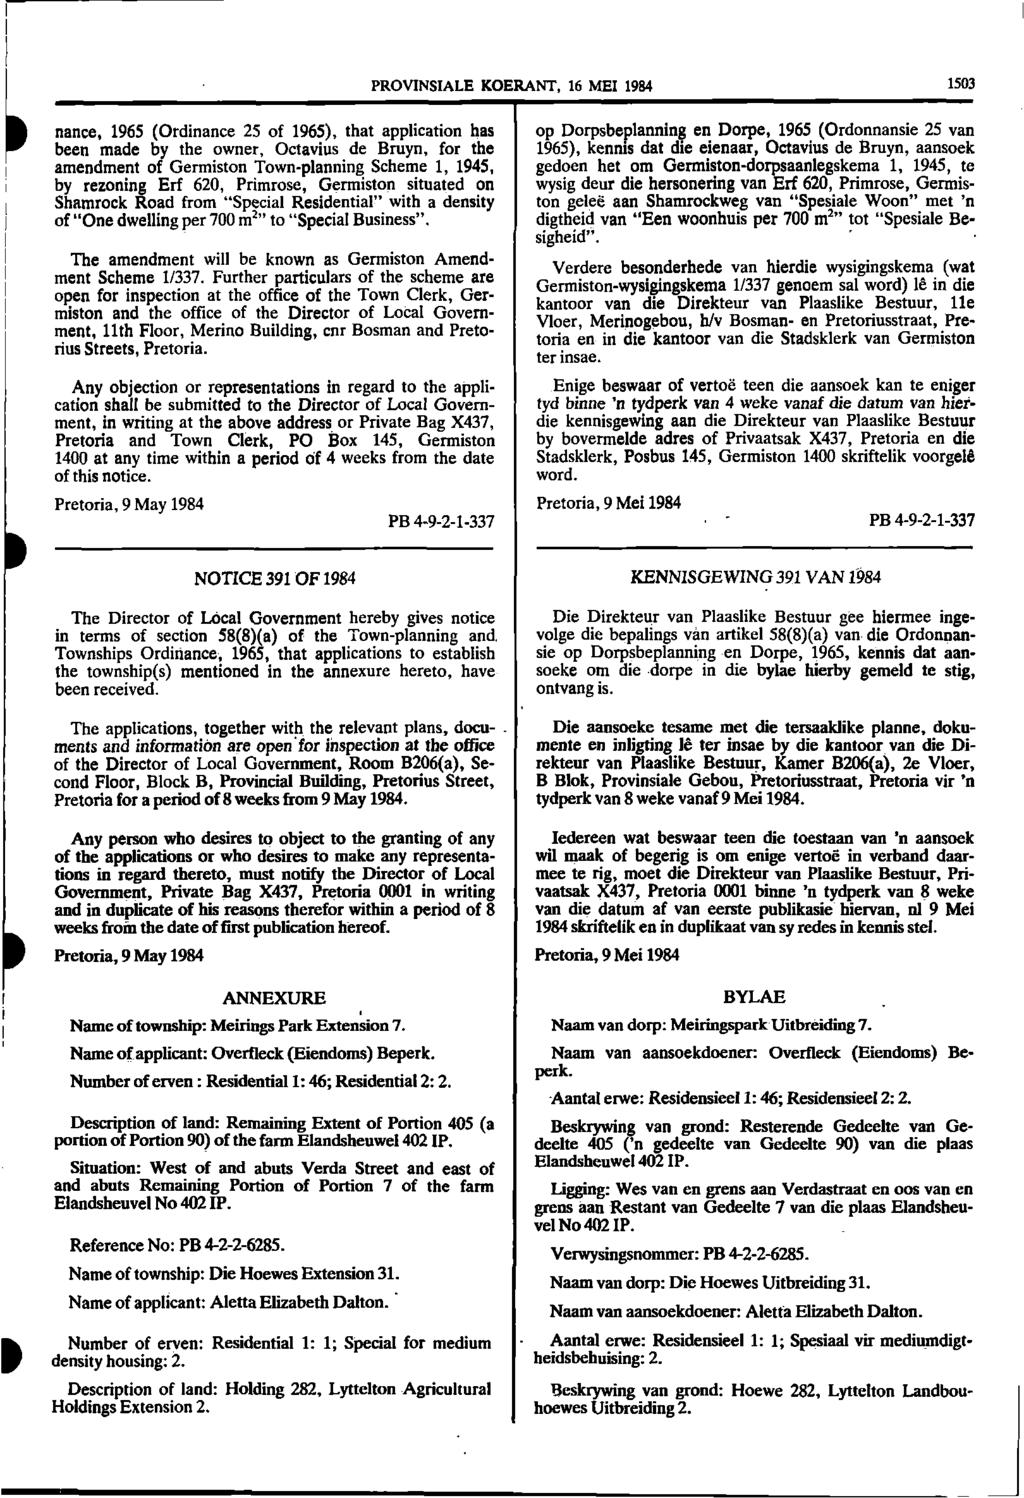 PROVINSIALE KOERANT, 16 MEI 1984 1503 nance, 1965 (Ordinance 25 of 1965), that application has been made by the owner, Octavius de Bruyn, for the amendment of Germiston Town-planning Scheme 1, 1945,